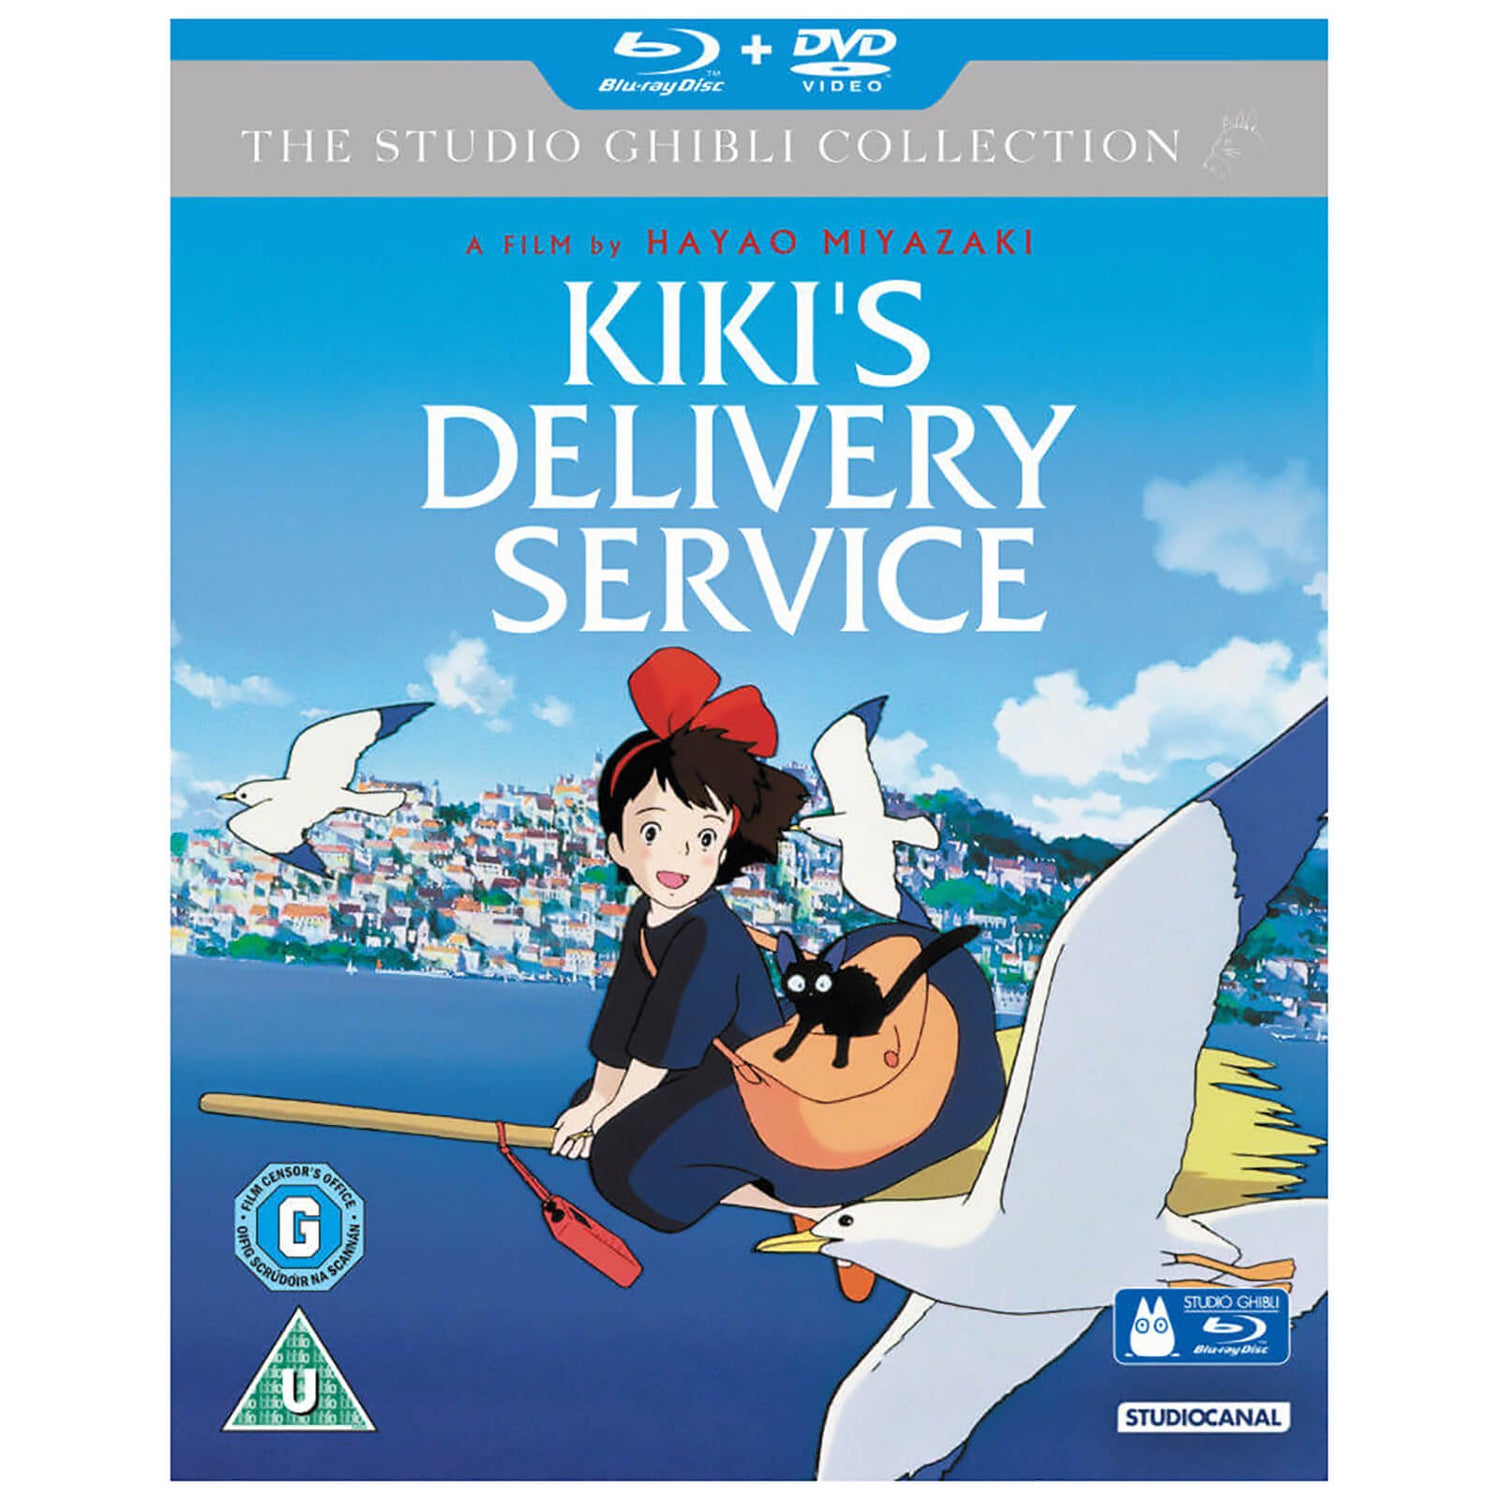 Kikis Lieferservice - Double Play (Blu-Ray und DVD)